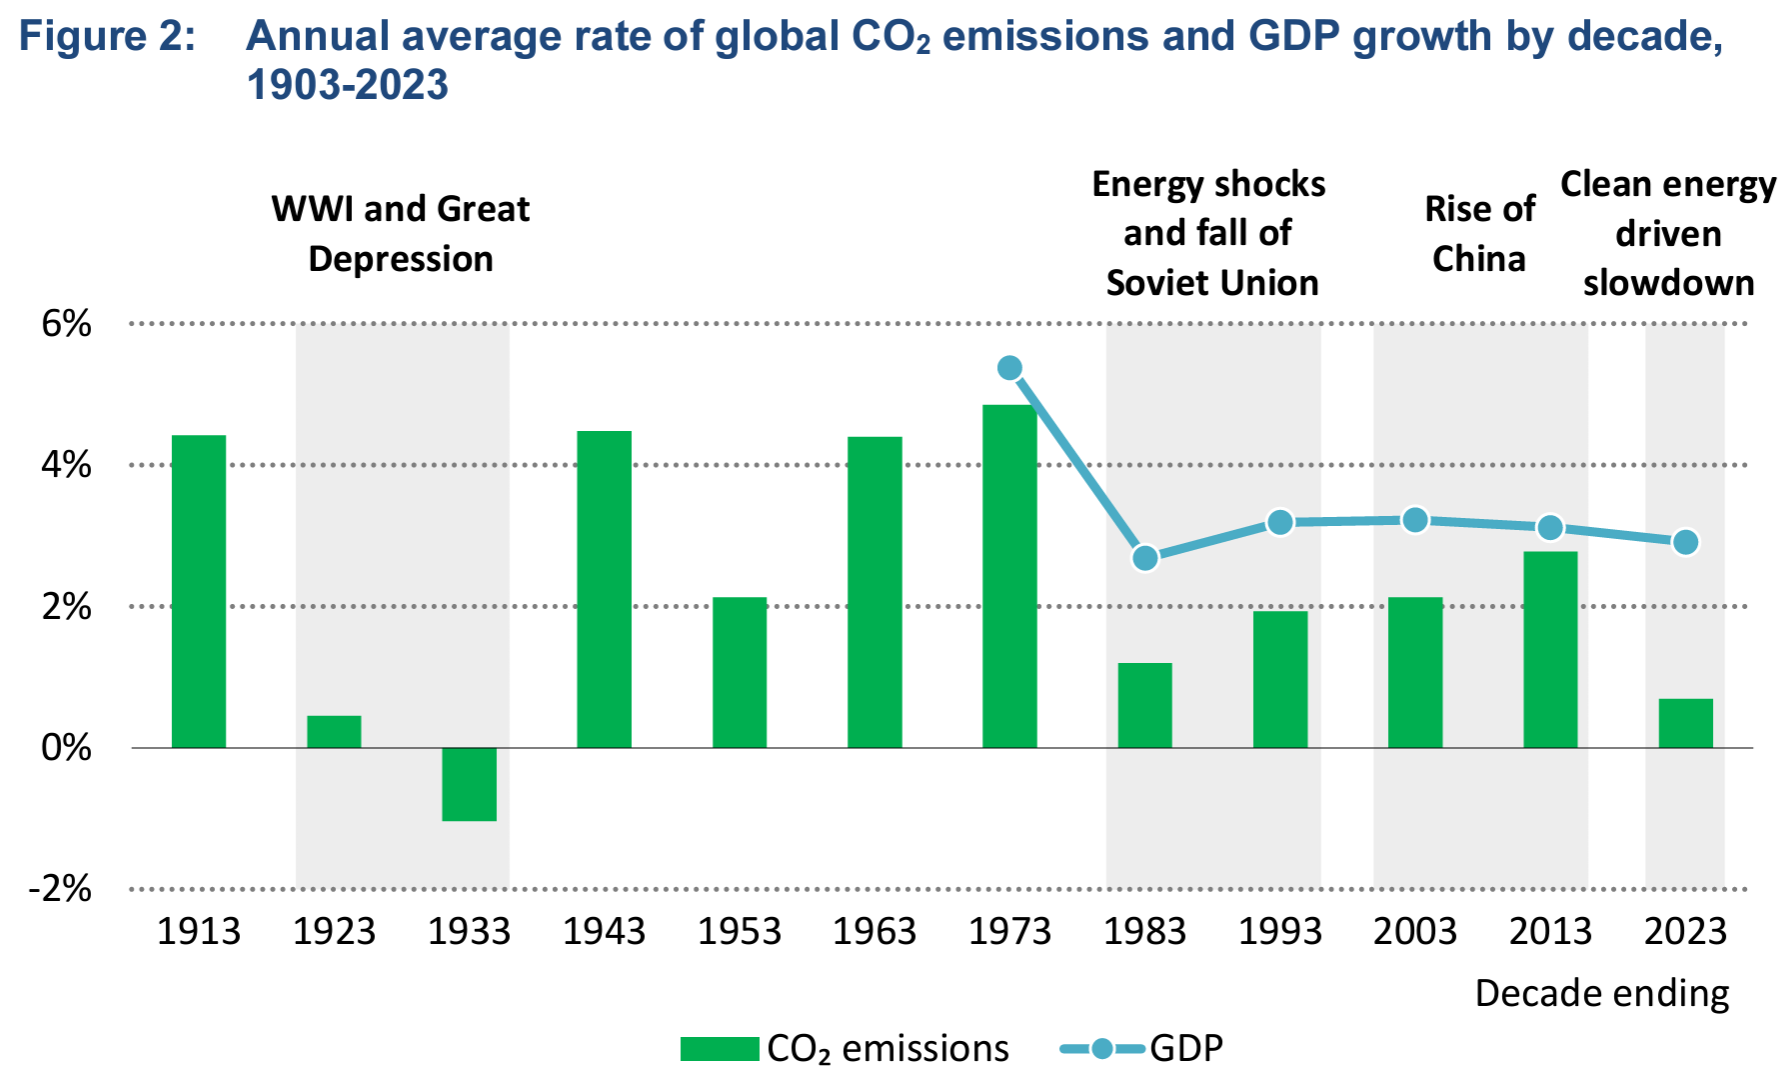 Annual average rate of global CO2 emissions and GDP growth by decade, 1903-2023. The 1.1 percent increase in emissions in 2023 represented an increase of around 410 million tonnes (Mt CO2). The percentage growth of emissions was substantially slower than global GDP growth, which was around 3 percent in 2023. Last year therefore continued the recent trend of CO2 growing more slowly than global economic activity. Over the ten years ending with 2023, global CO2 emissions have grown by slightly more than 0.5% per year. This is not just due to the Covid 19 pandemic: although emissions fell precipitously in 2020, by the following year they had already rebounded to the pre-pandemic level. It was also not caused by slow global GDP growth, which averaged a robust 3 percent per year across the course of the previous decade, in line with the annual average over the last 50 years. The rate of emissions growth seen over the last decade is slower than that seen during the 1970s and 1980s, which saw major disruptions with the two energy shocks of 1973-4 and 1979-80, and a macroeconomic shock of global significance with the fall of the Soviet Union in 1989-90. When the last ten years are put in a broader historical context, a comparably slow rate of CO2 emissions growth only occurred in the extremely disruptive decades of World War I and the Great Depression. Global CO2 emissions are therefore undergoing a structural slowdown even as global prosperity grows. Graphic: IEA